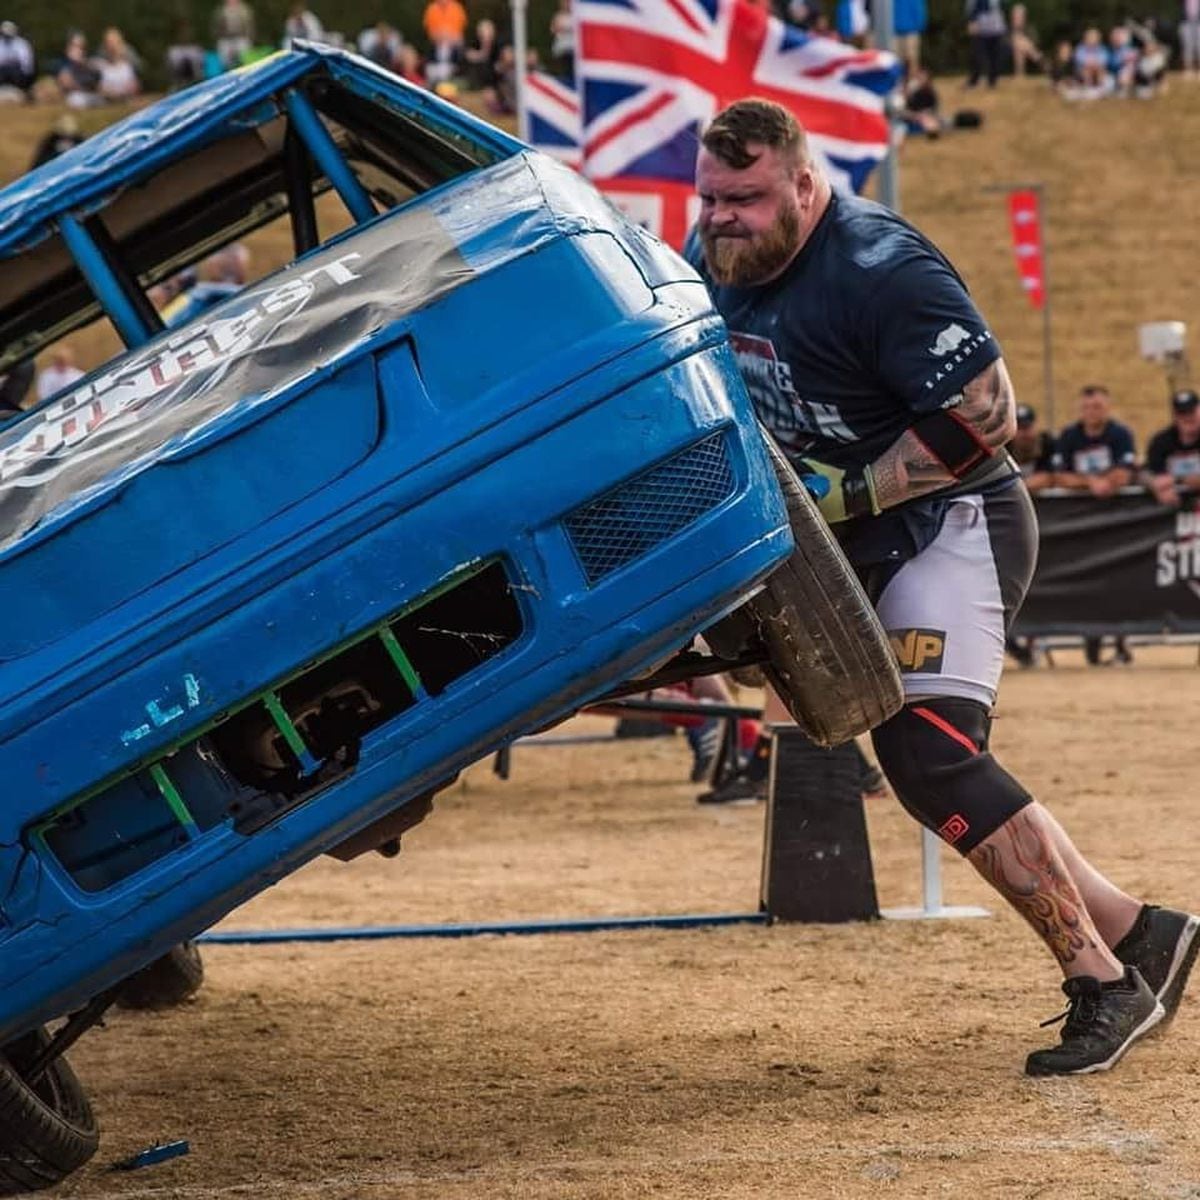 Carry that weight England's strongest man on pulling trucks, flipping